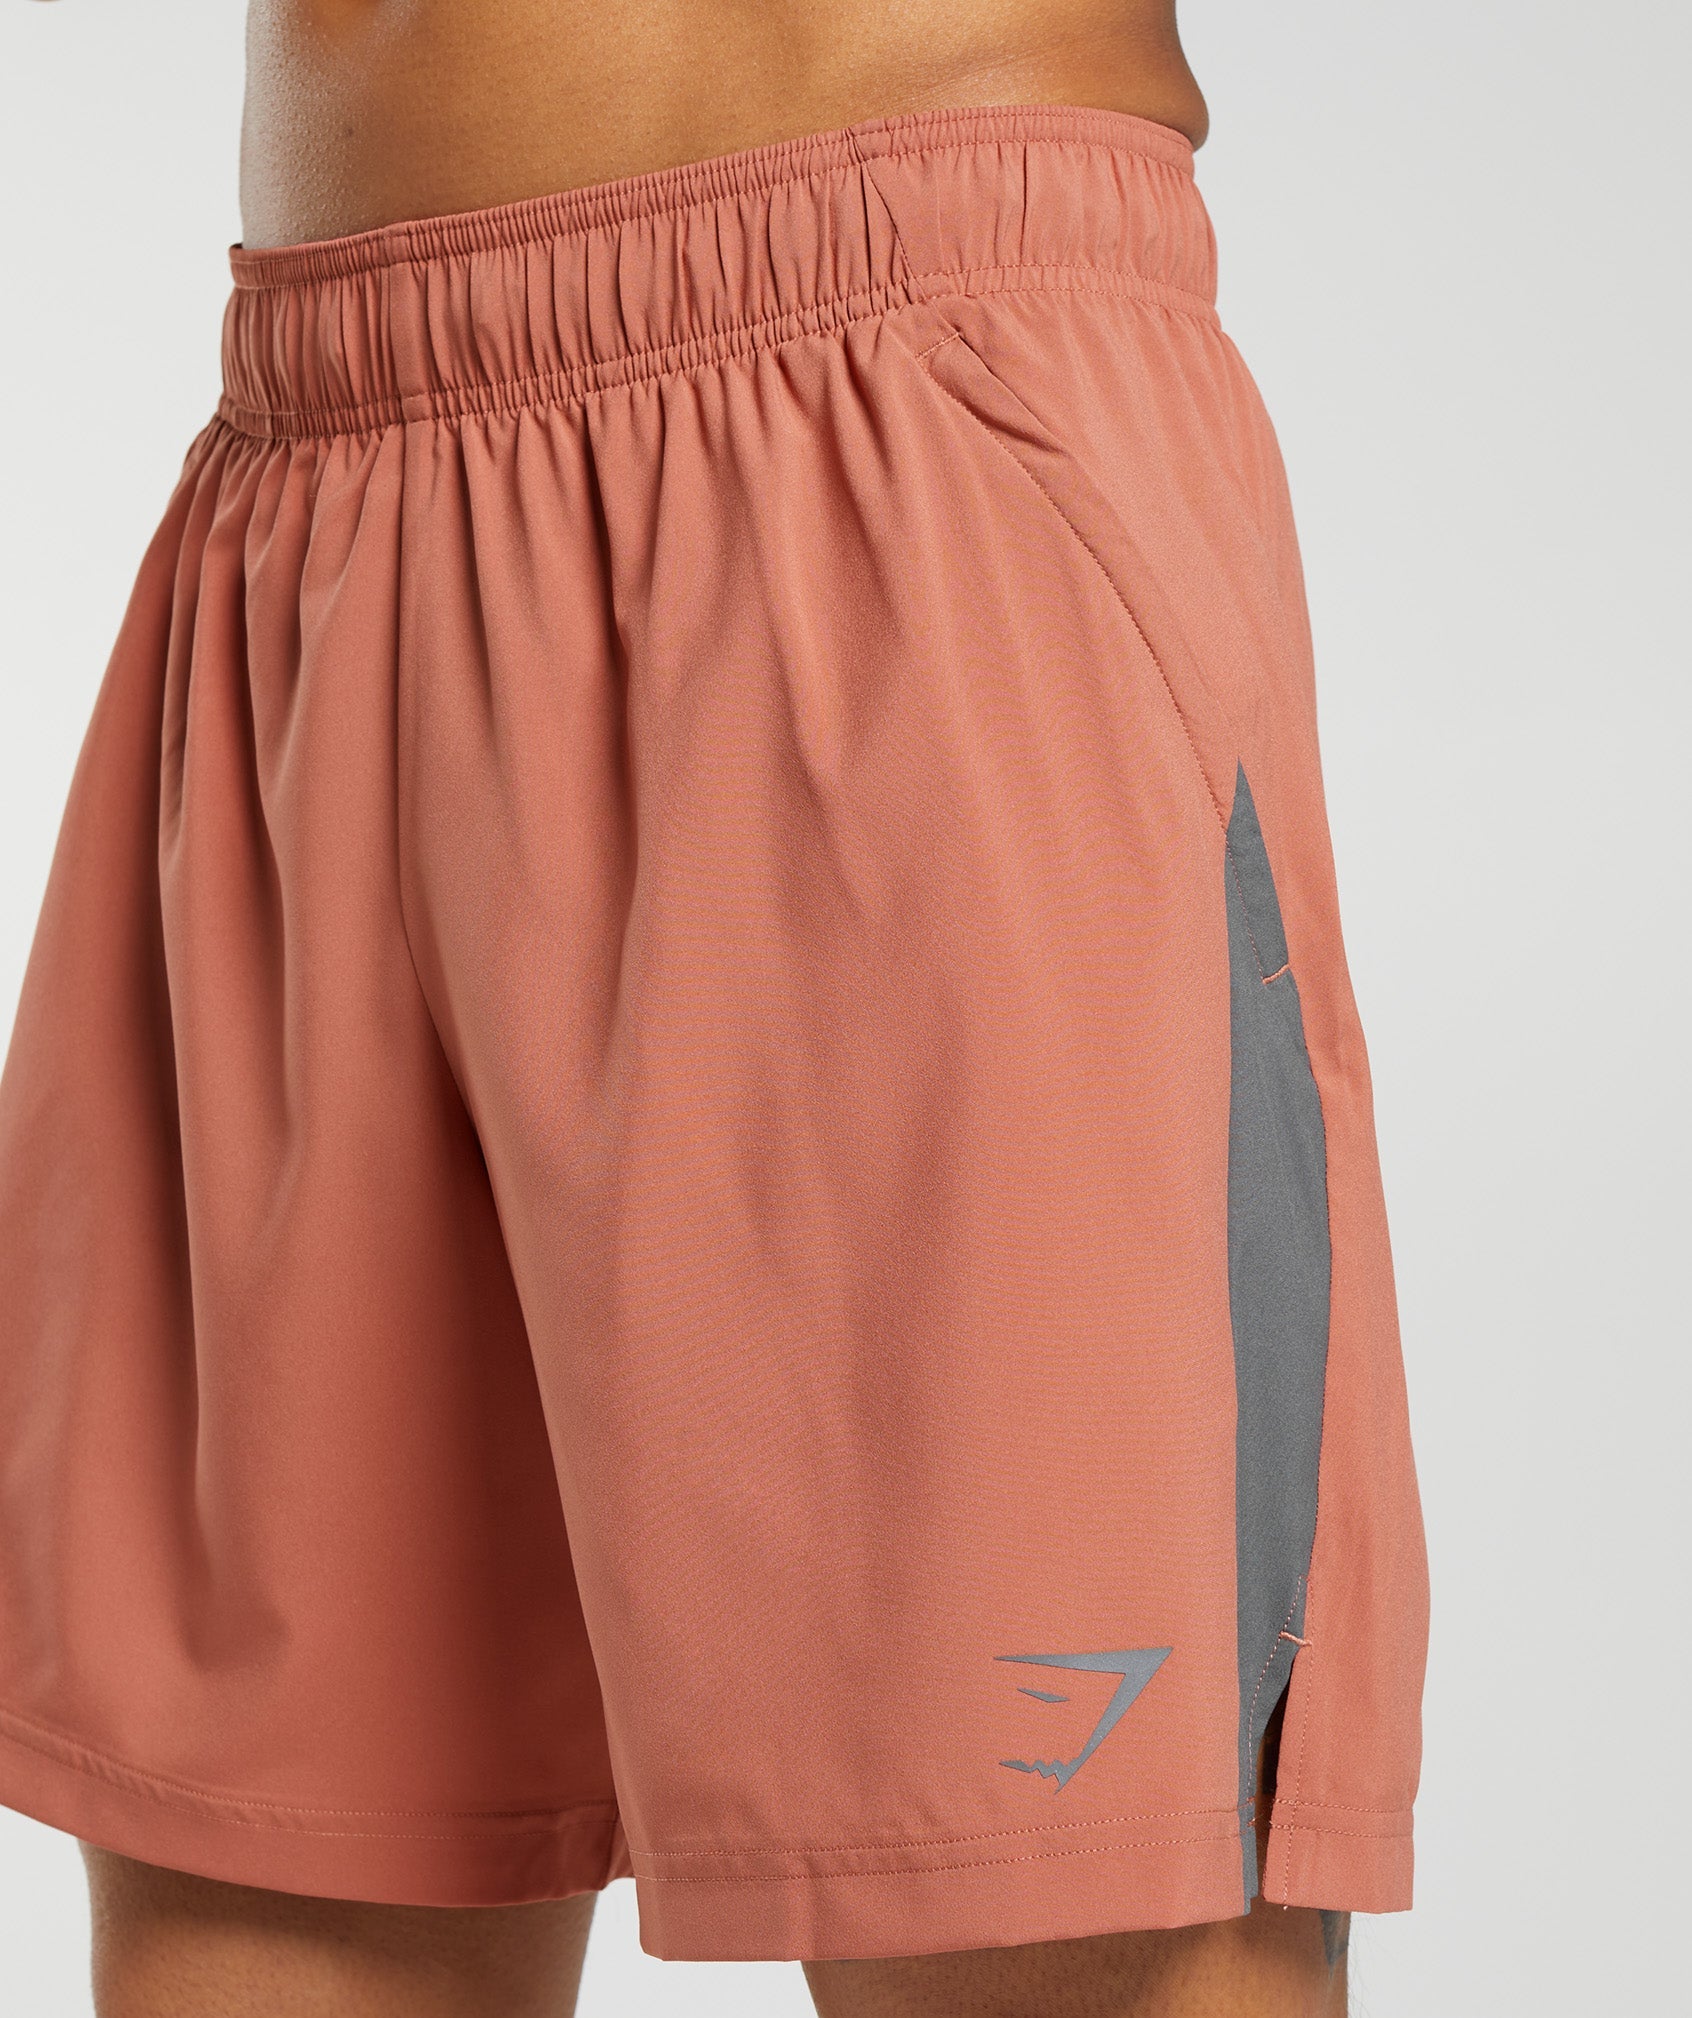 Gymshark Sport Shorts - Toasted Brown/Silhouette Grey